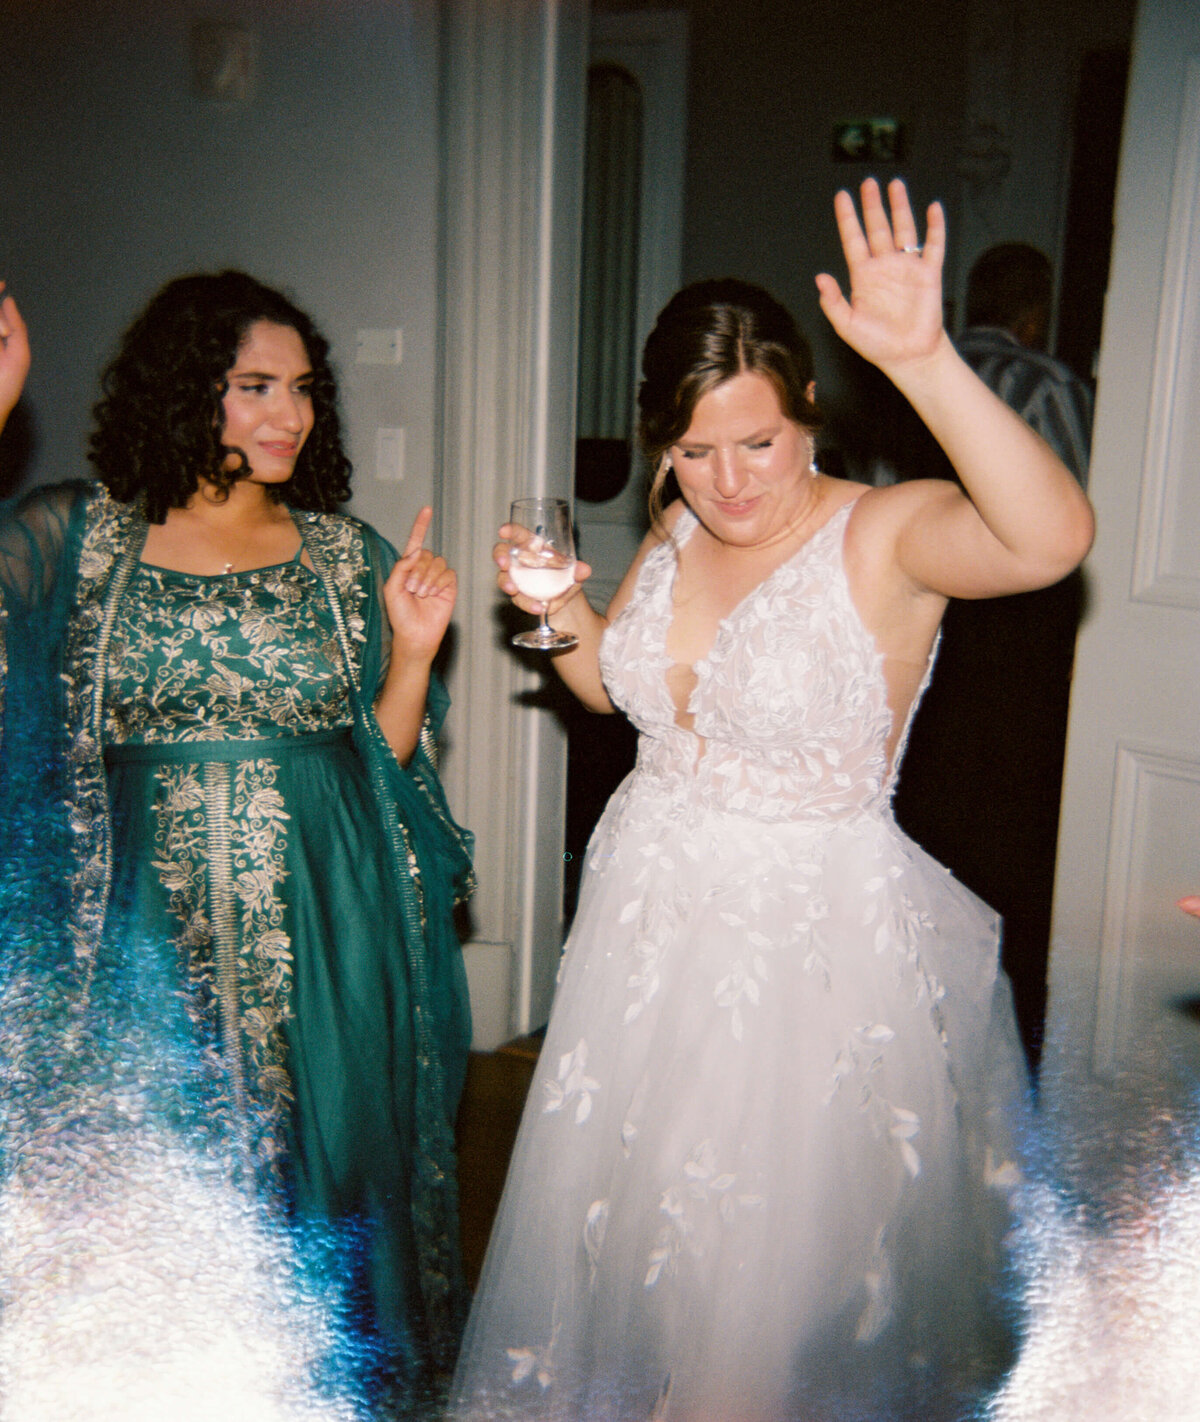 Bride with hand in the air and holding a drink in the other